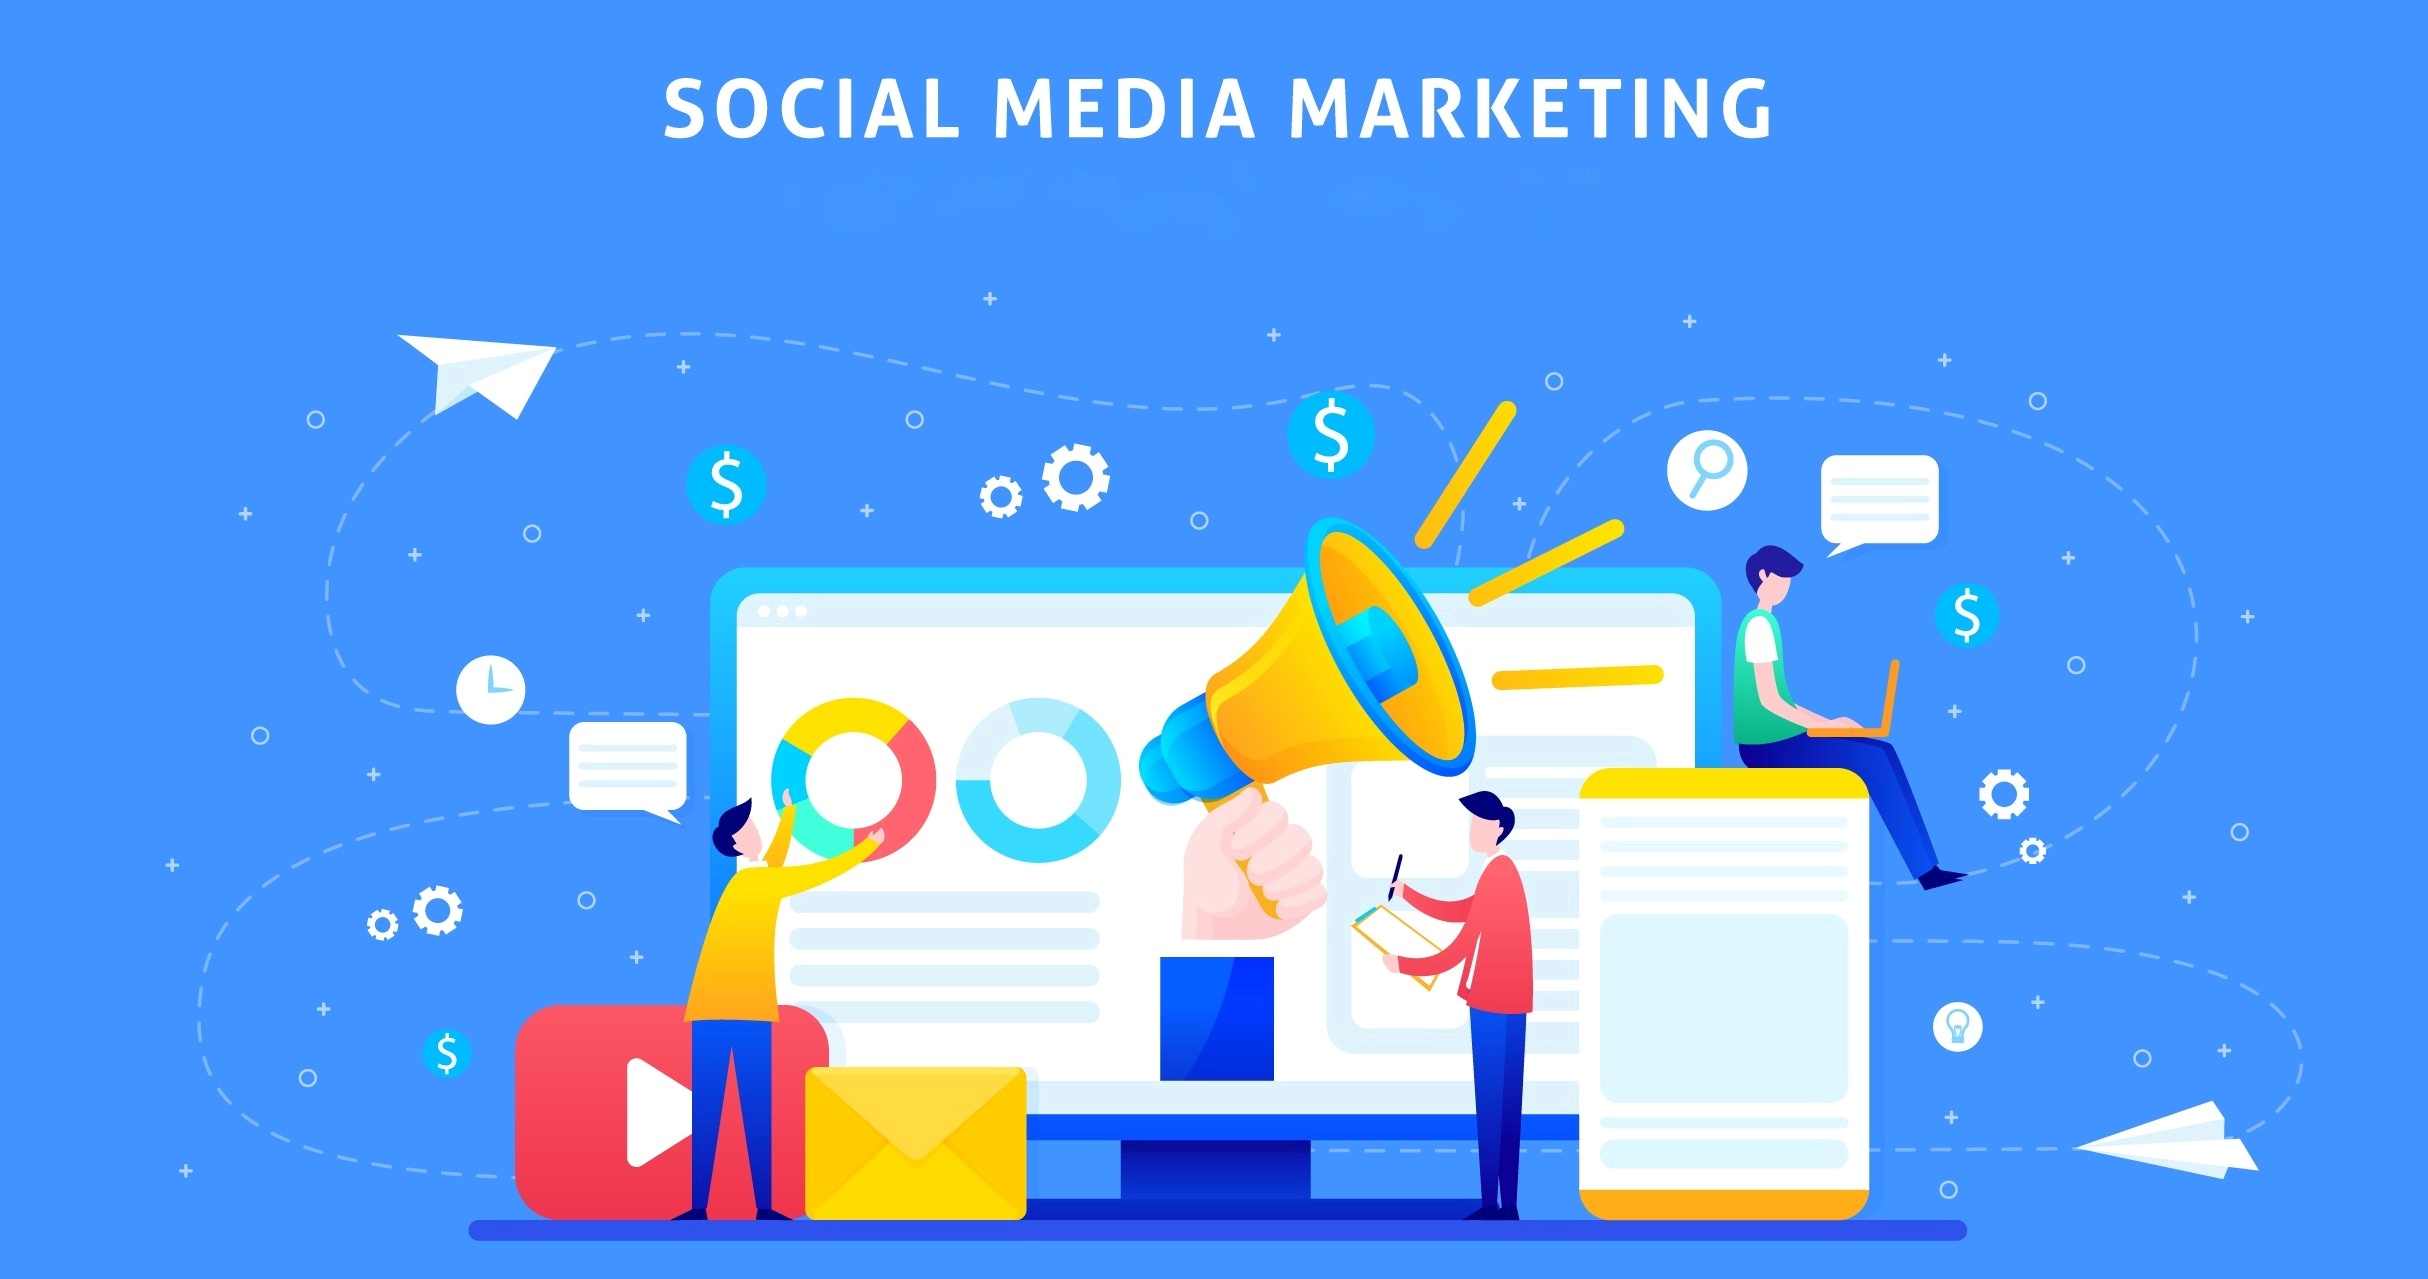 5 Brilliant ways to make social media marketing work for you.